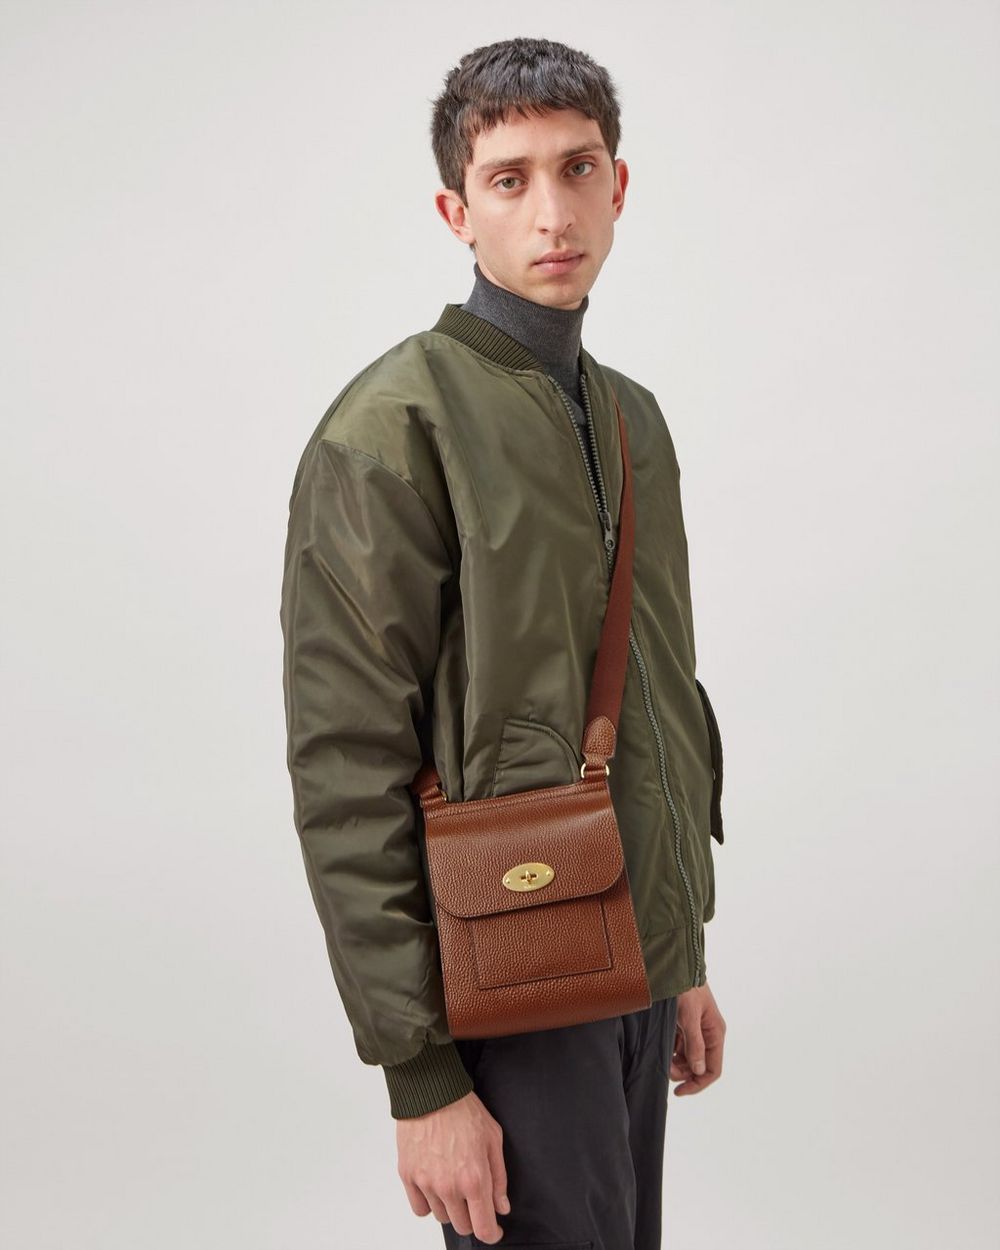 Buy Mulberry Antony Small Messenger Bag - Neutrals At 24% Off